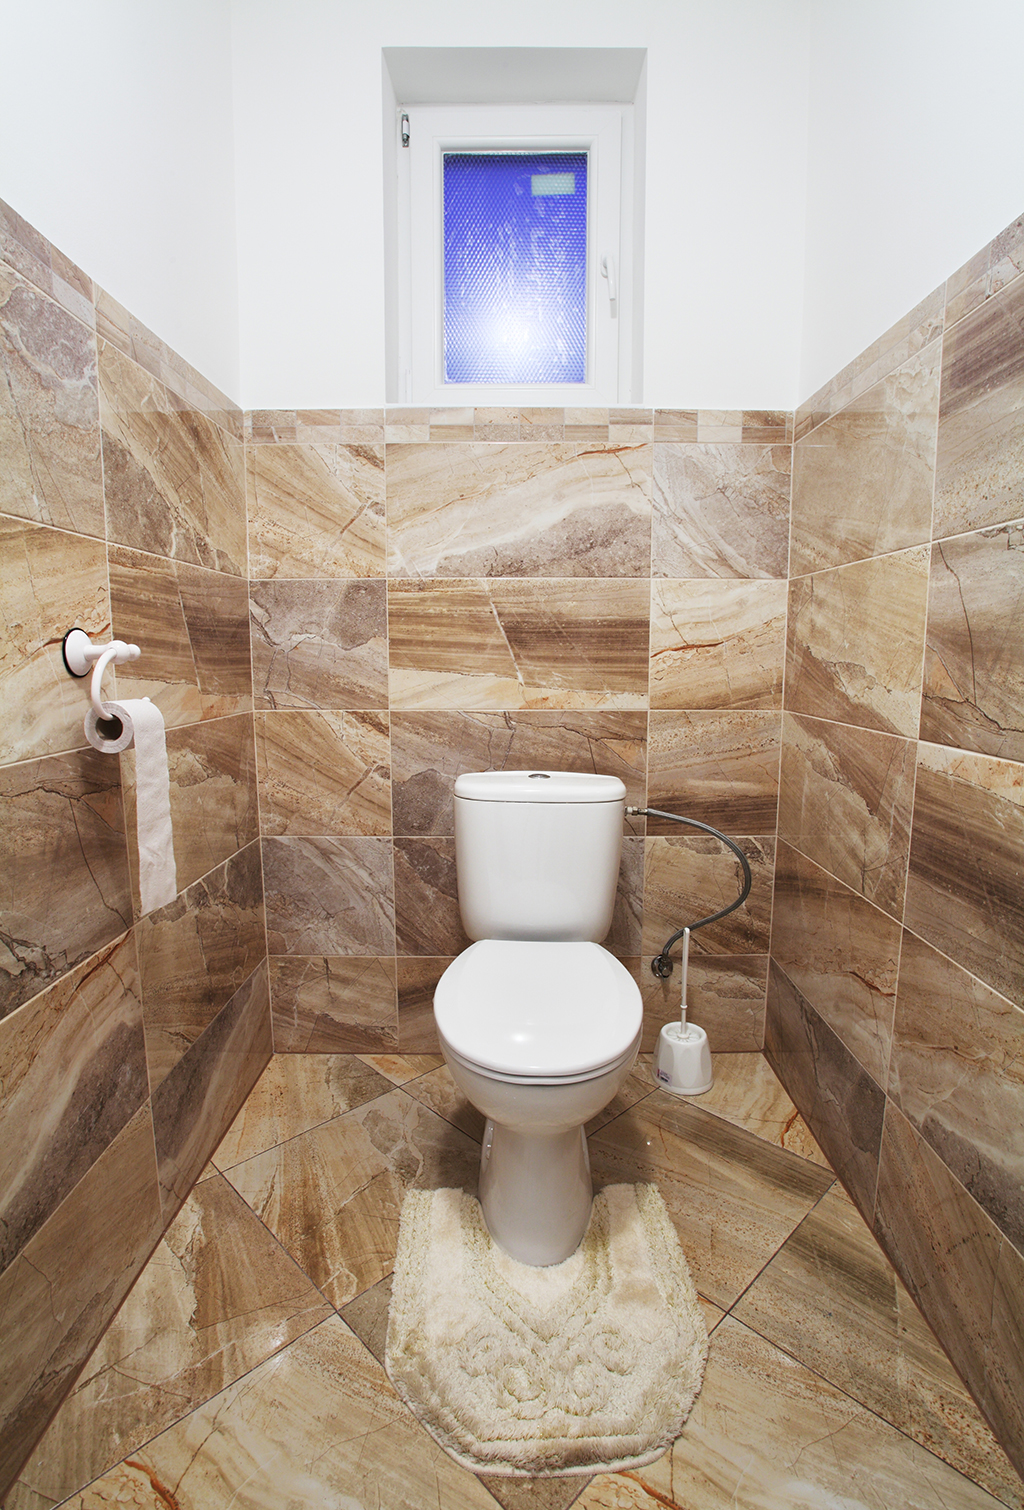 Plumber Upgrade To Your Bathroom’s Throne: Popular Toilets For Your Home | Boerne, TX